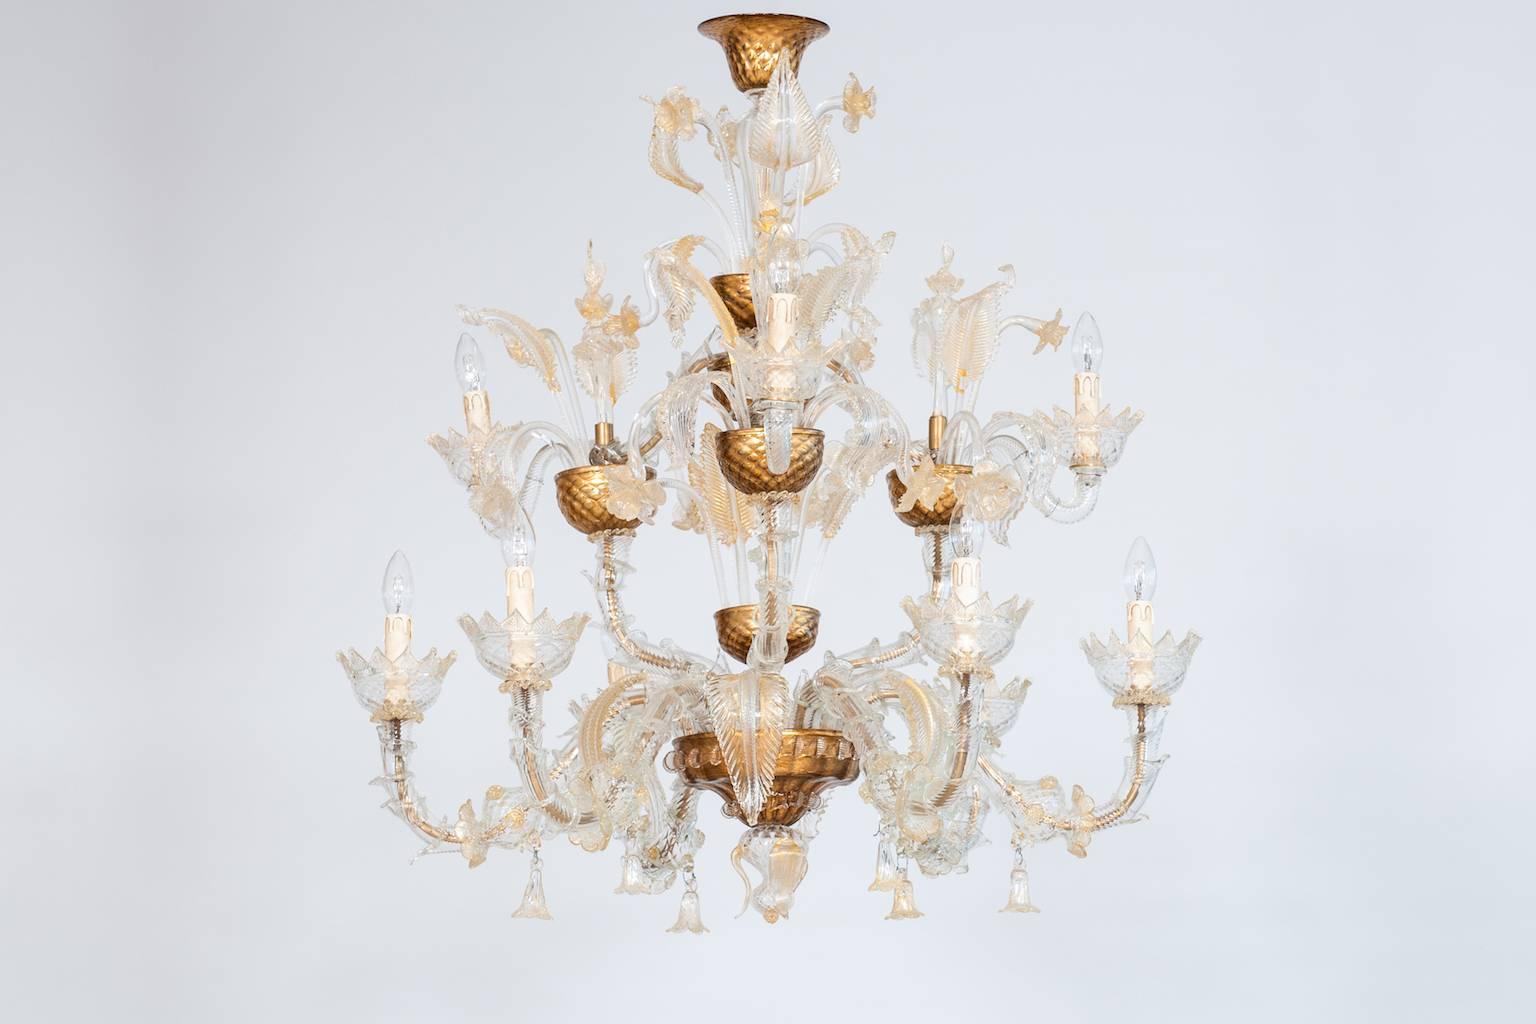 Elegant Italian Ca'rezzonico chandelier in Murano glass transparent and gold, in very excellent original conditions, and without any damages, made circa in 1950s. The chandelier is 37.41 inches high, by 35.43 inches diameter and having nine